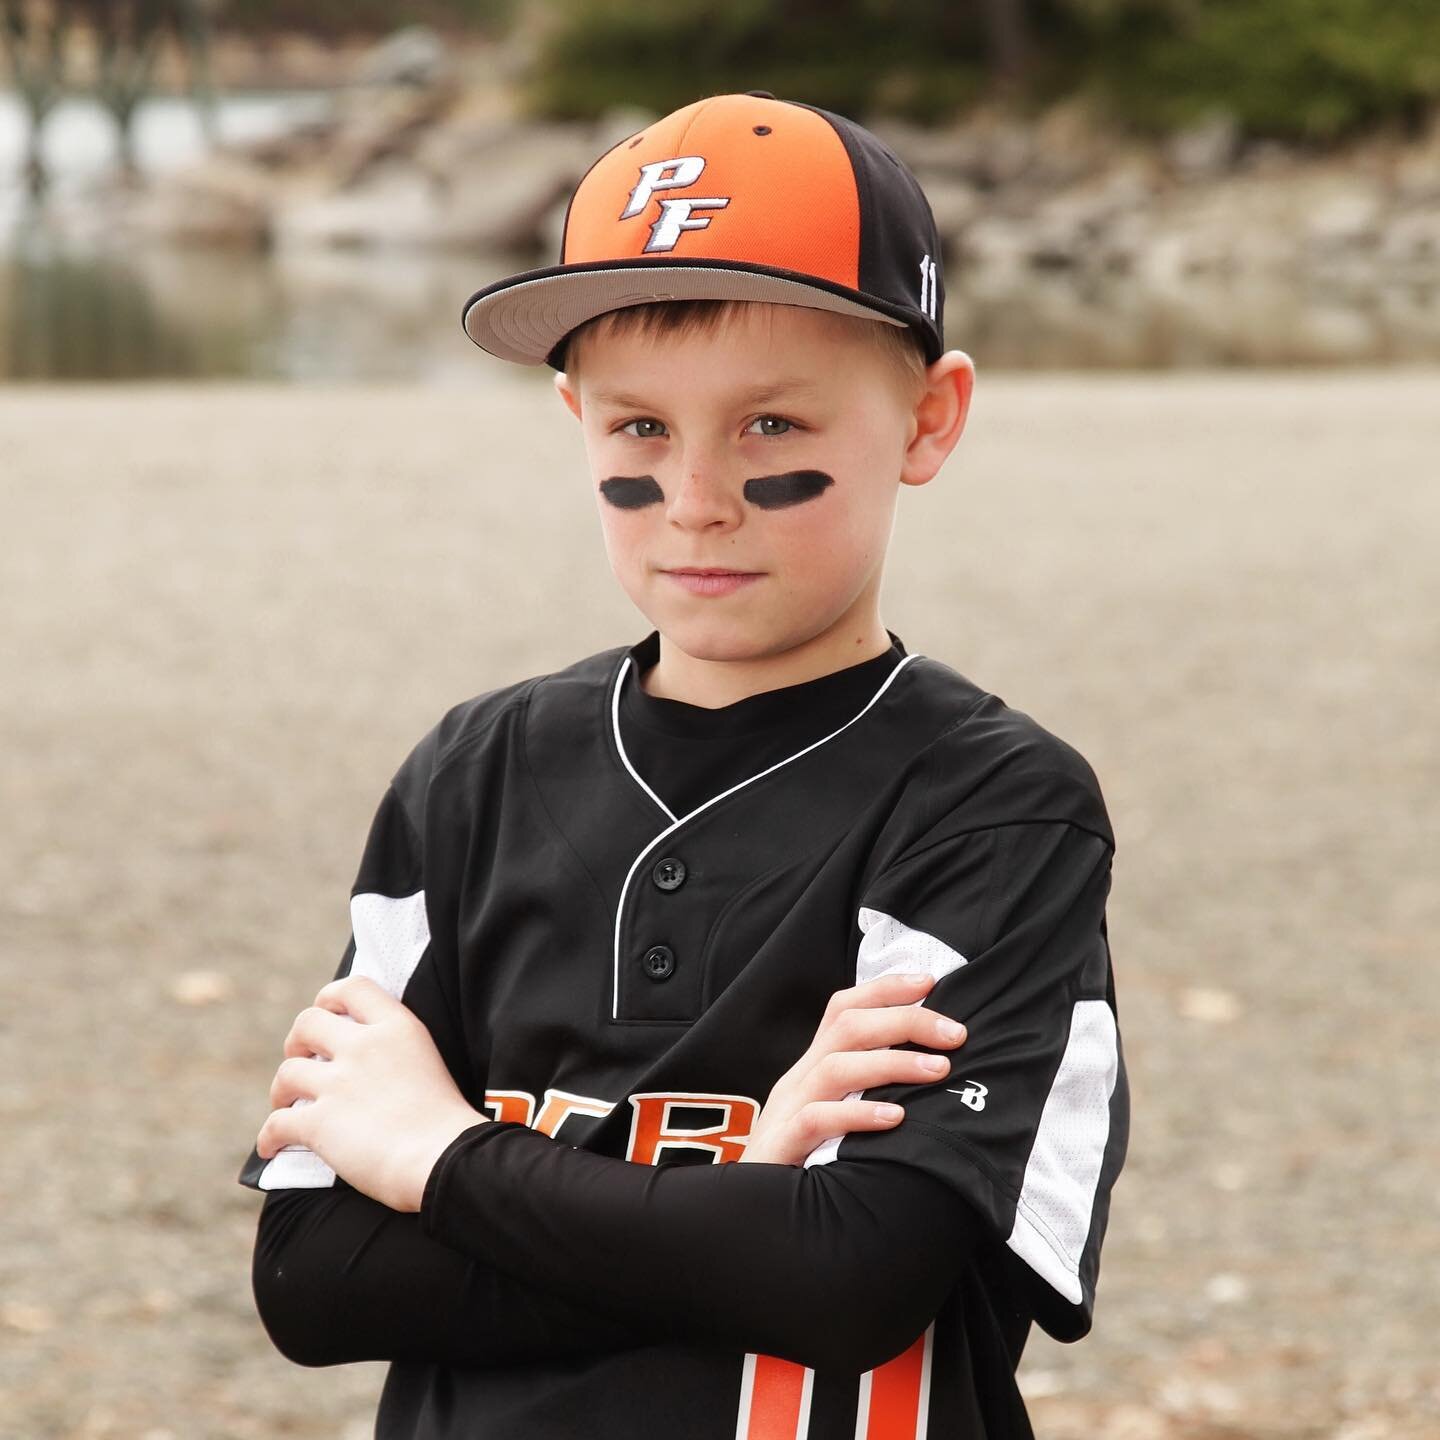 Photos that score with creative poses and backdrops. ⚾️ 
.
.
.
.
.
#breezyphotography #family #pnwphotographer #lifestylephotography #outdoorphotography #familyphotos #familyphotography #creativephotography #spokanephotographer #funfamilyphotos #life